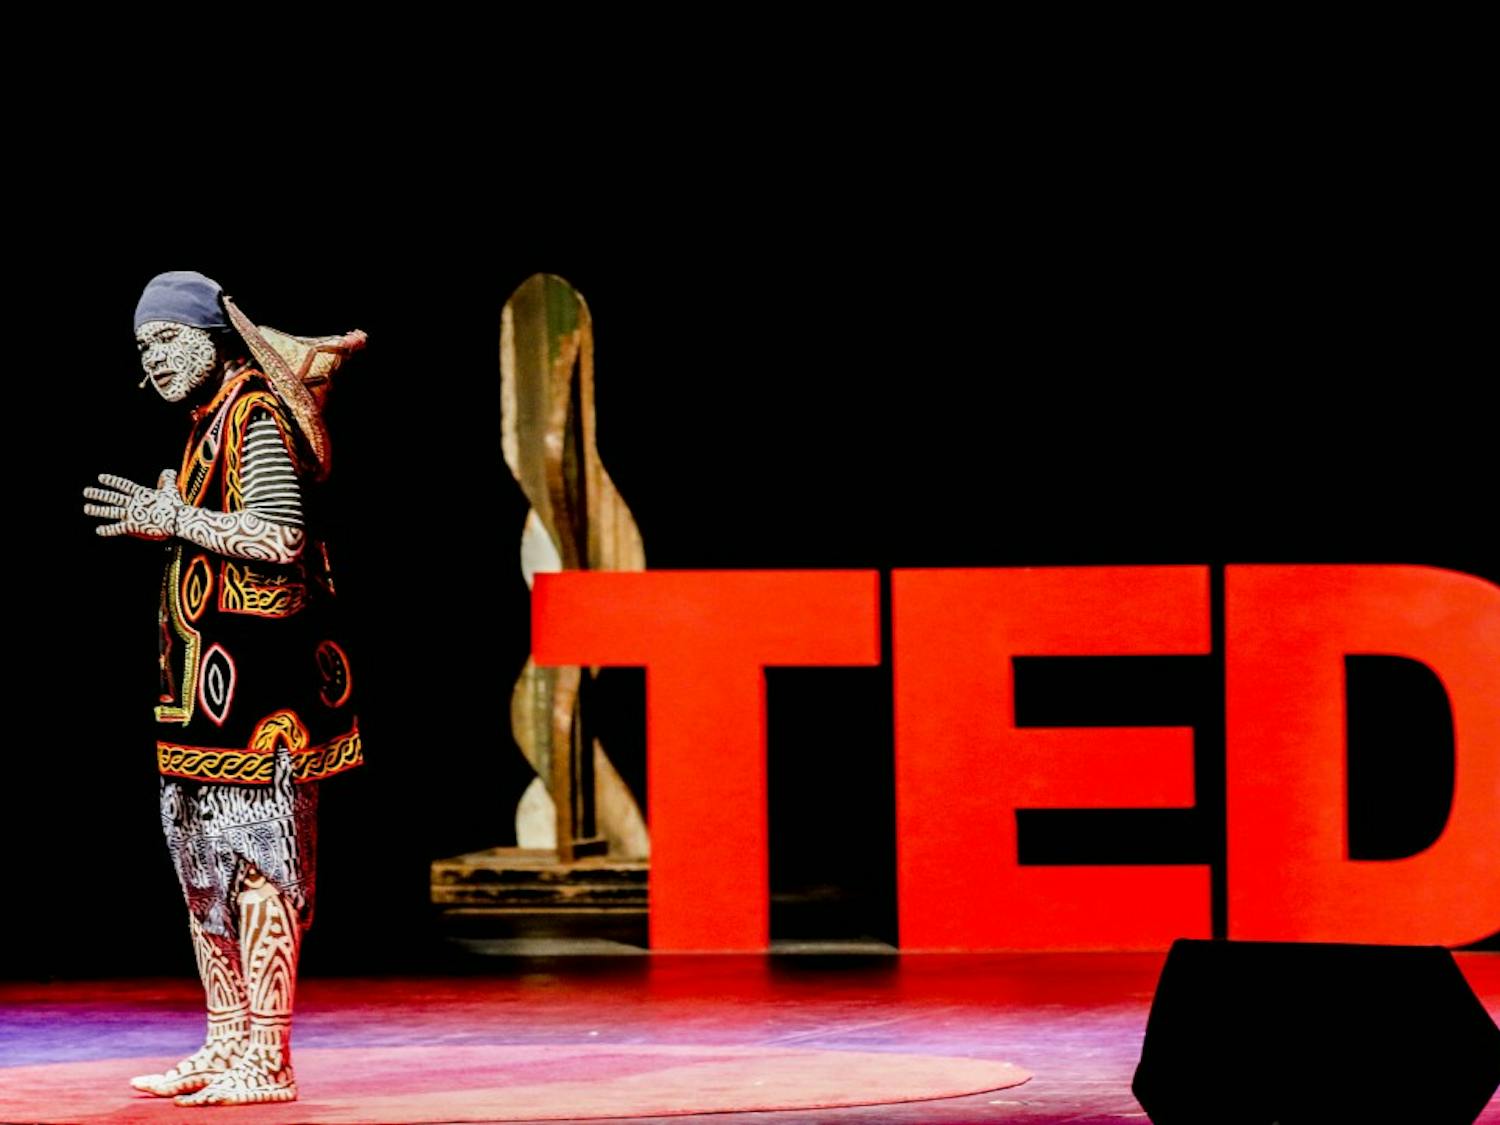 Issa Nyaphage talks about the power art has to save lives on Saturday, Sept. 9, 2017. This year, TEDxABQ 2017 featured 17 speakers ranging from entrepreneurs, scientists, artists and leaders from the community.